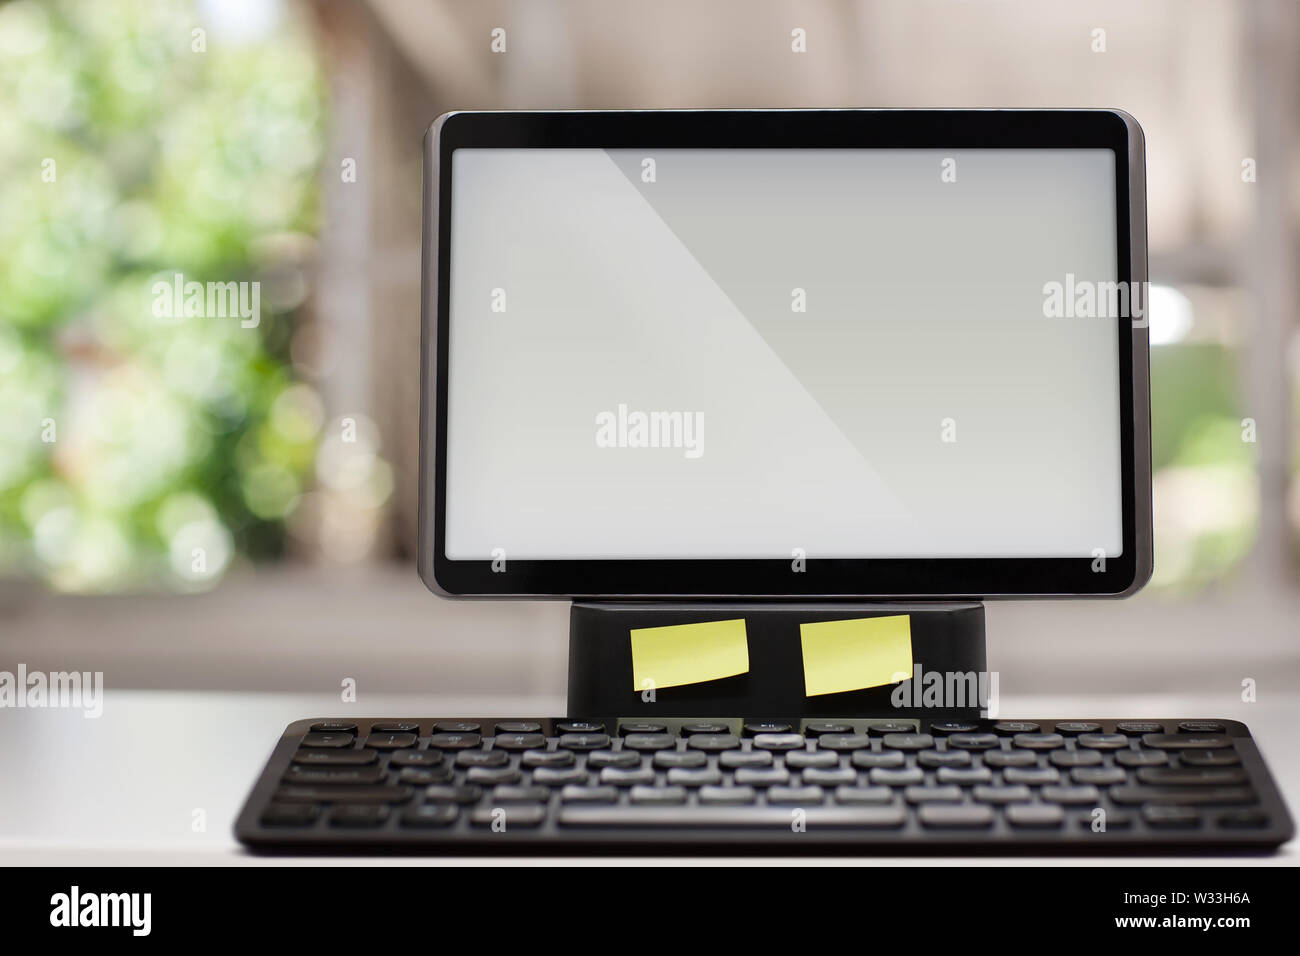 A computer with a touchscreen and wireless keyboard on a white desk with a window view in the background. Stock Photo